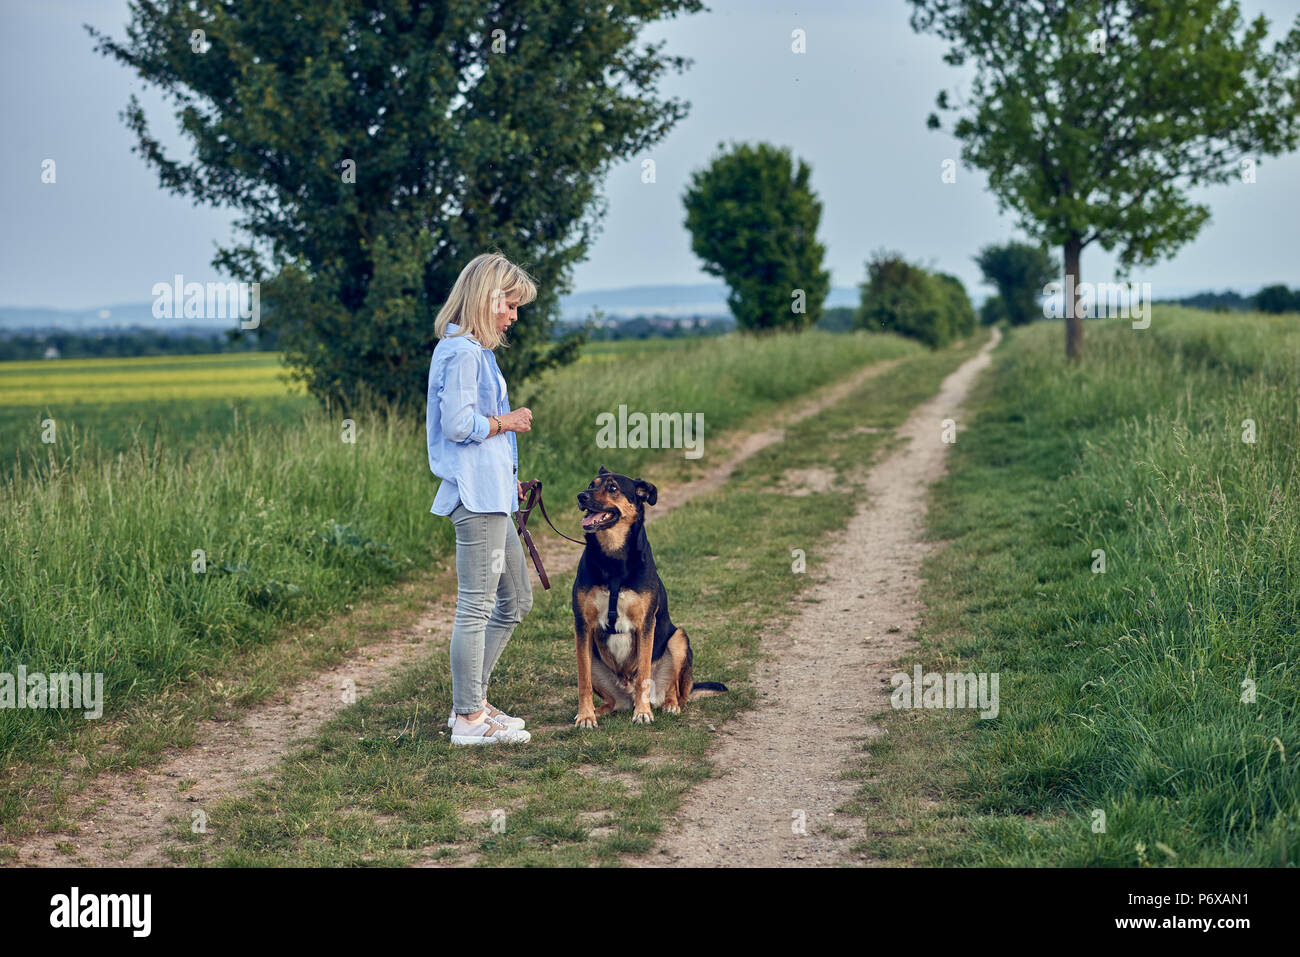 Attractive young woman teaching her dog on a walking harness and lead in a country landscape on a farm track Stock Photo